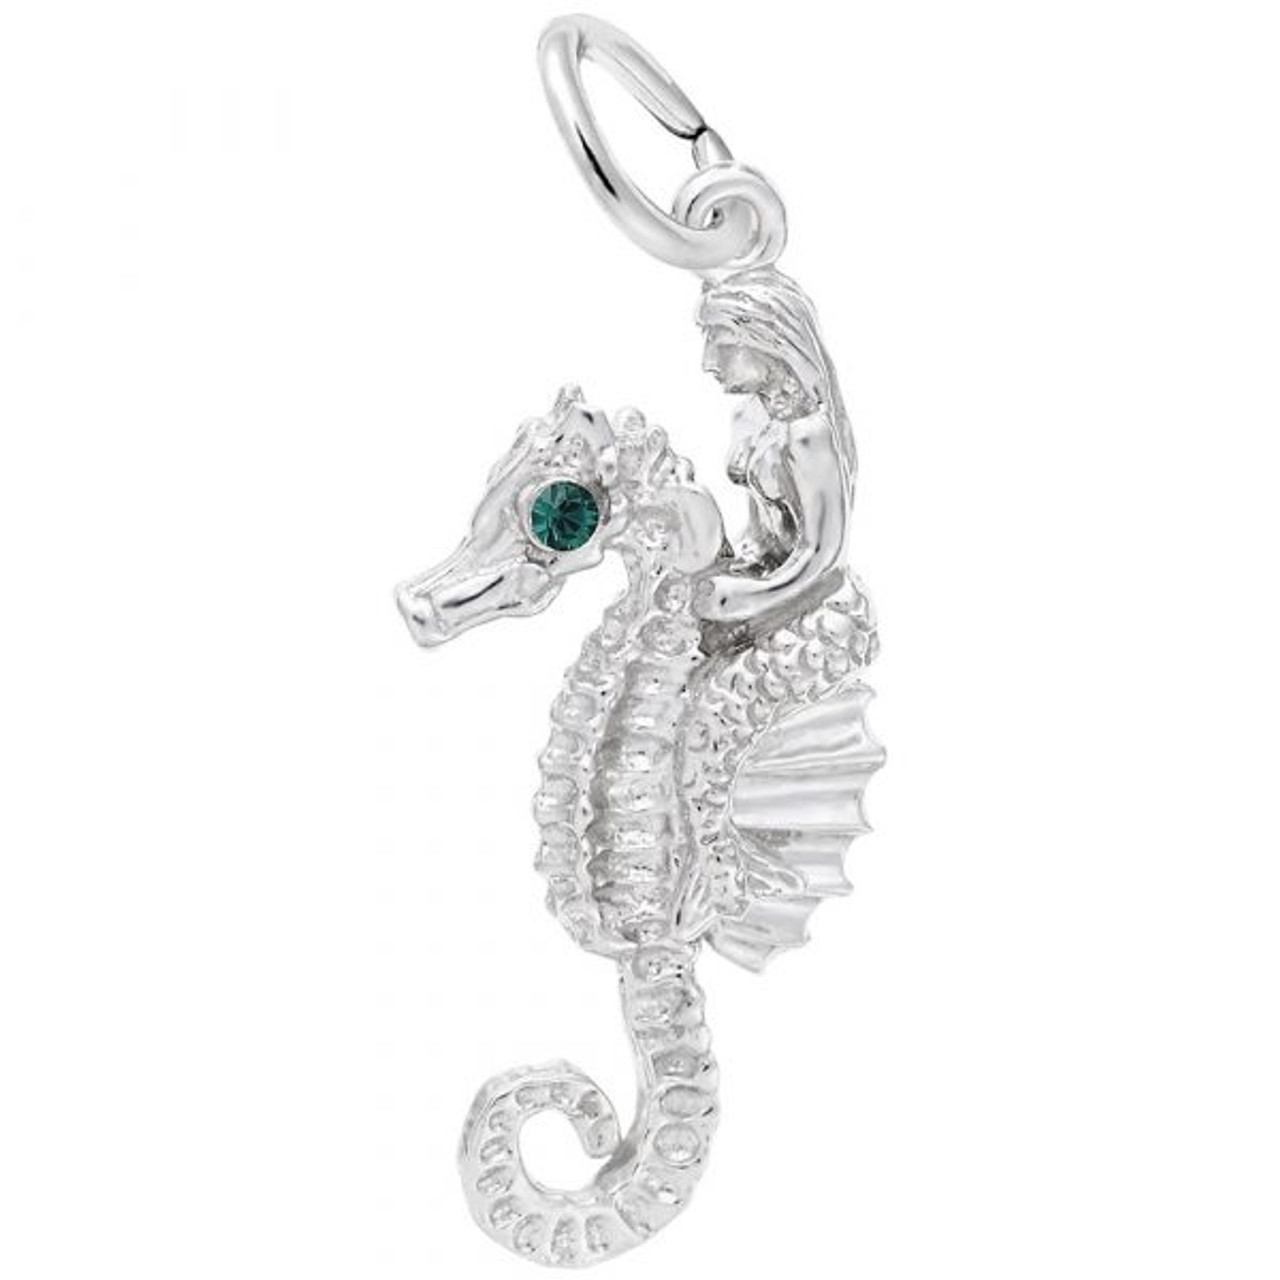 Mermaid and Seahorse Charm with Green Stone Accent - Sterling Silver and 14k White Gold